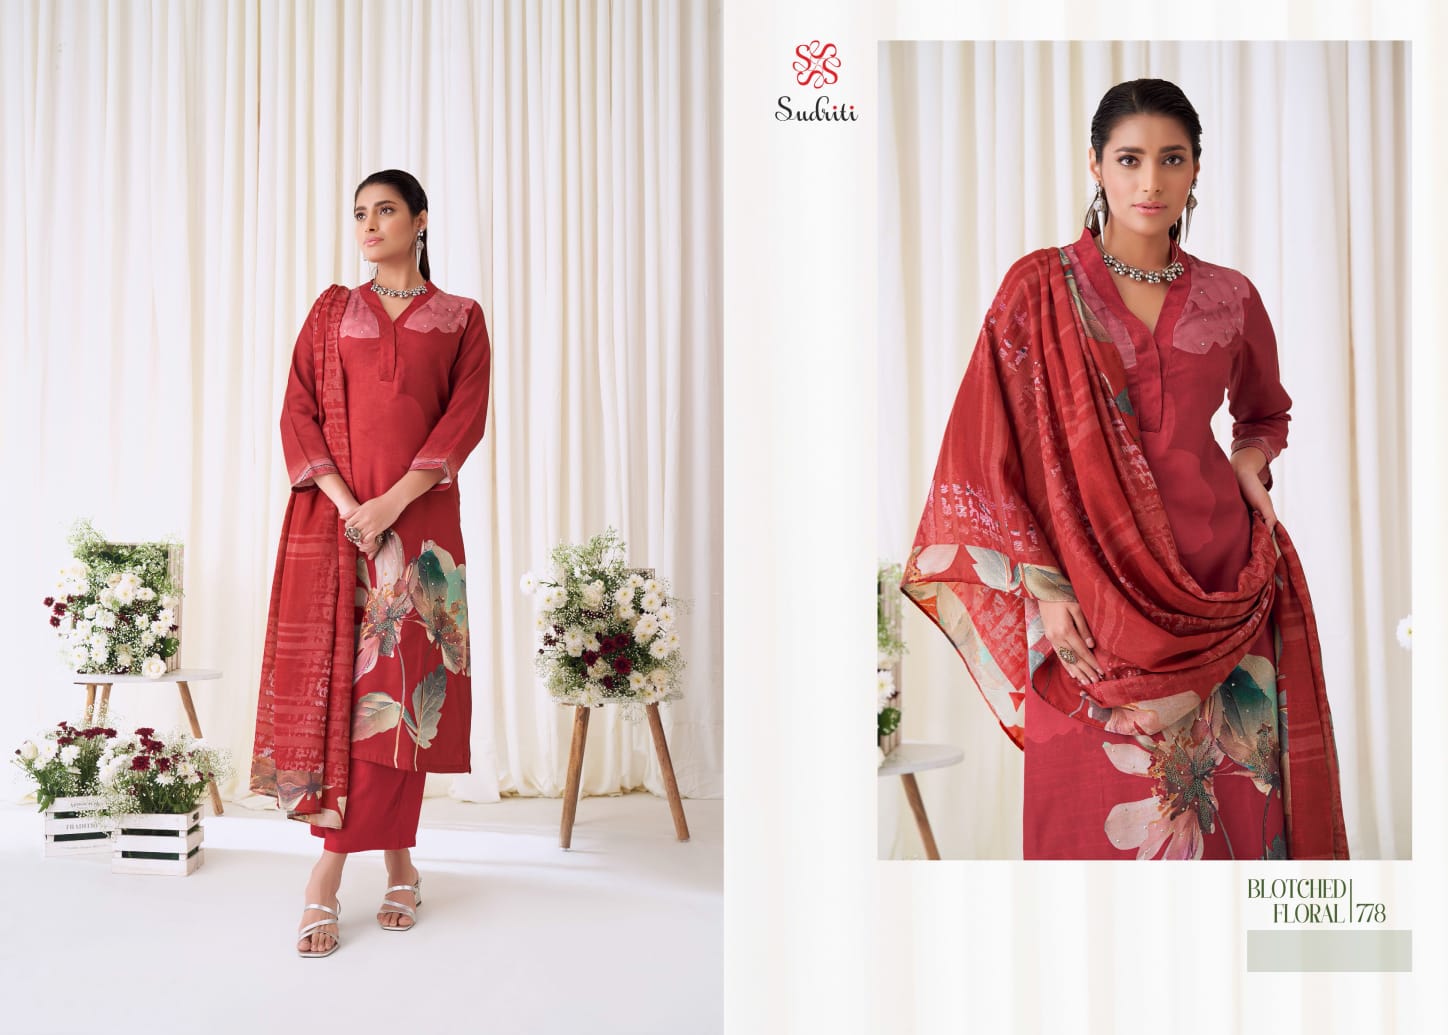 Sudriti Blotched Floral collection 10